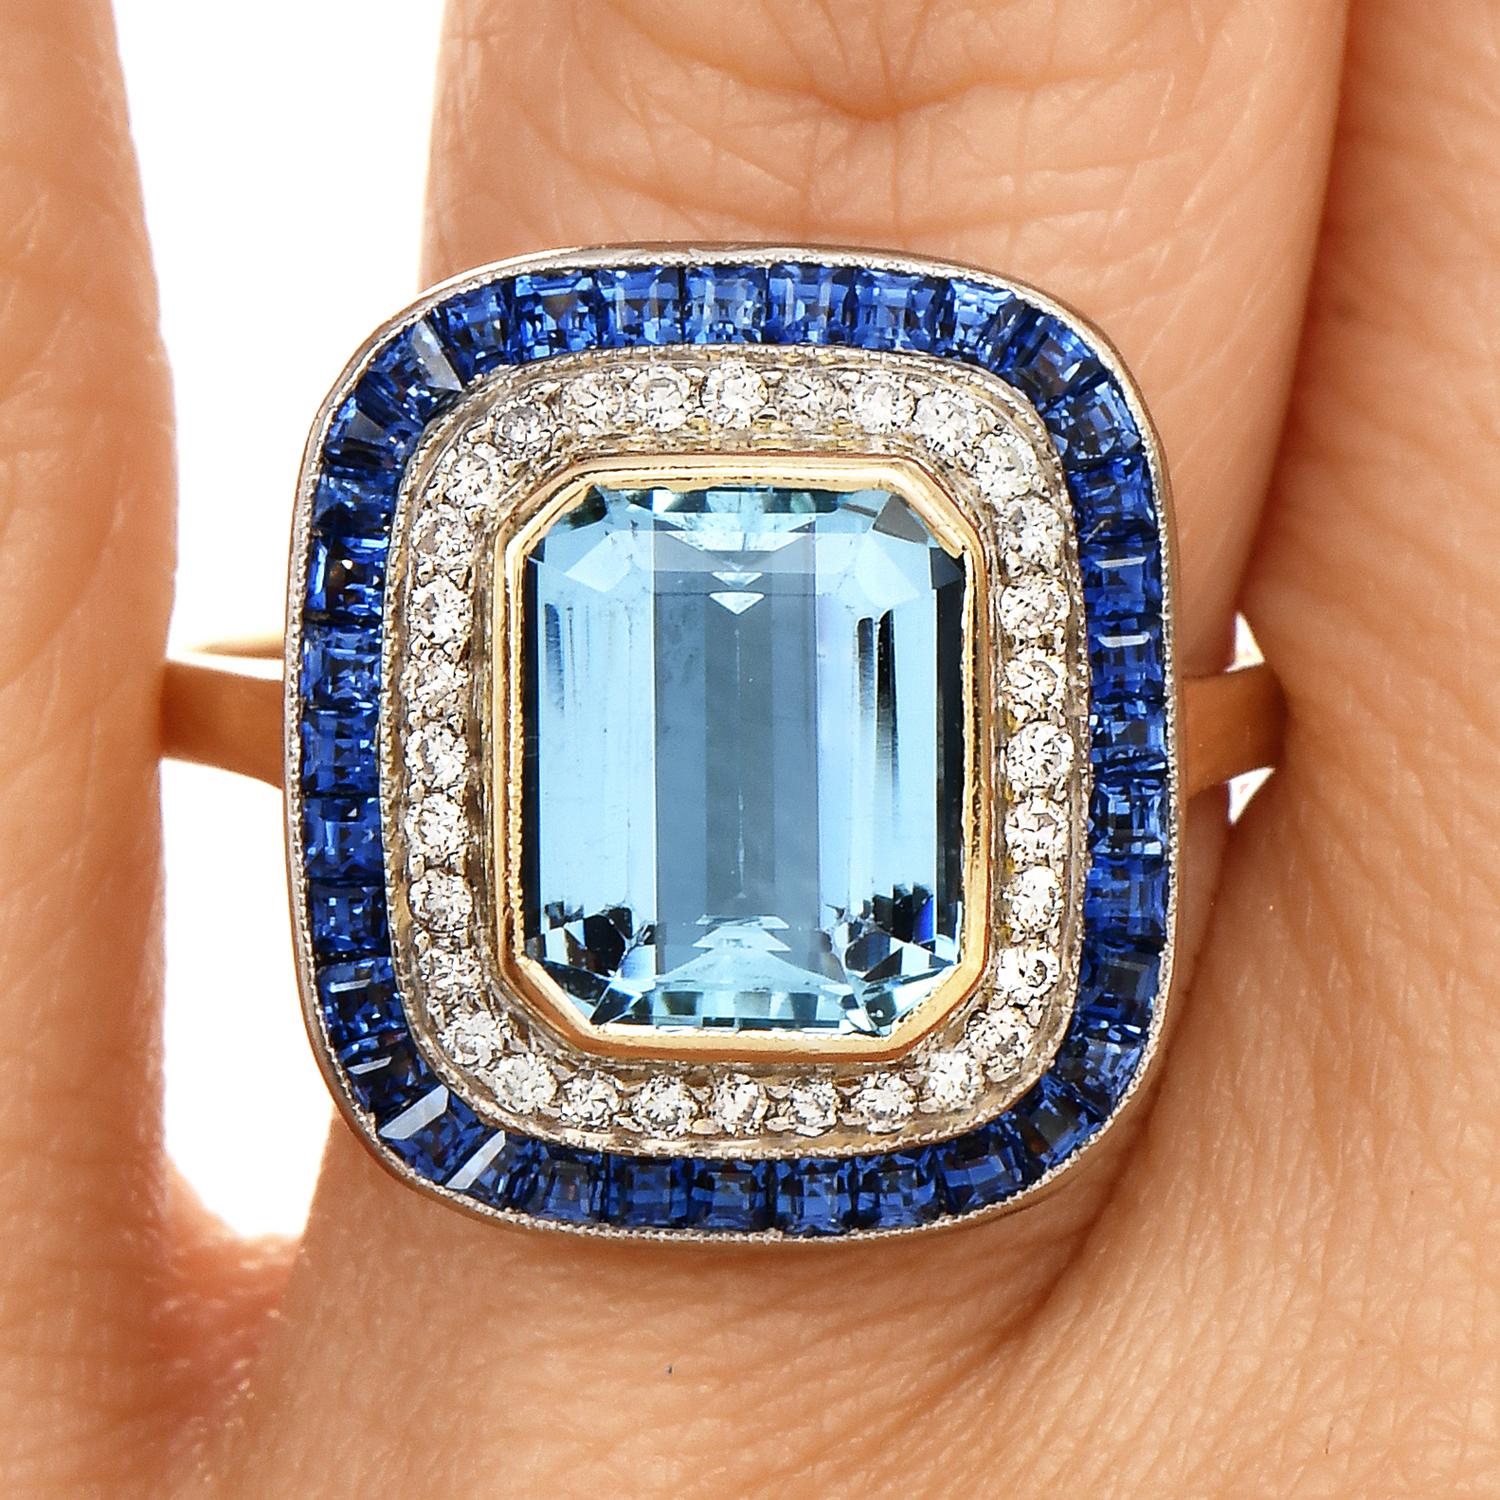 Ready for an Ocean Blue Birthstone Gift?

This glamorous Aquamarine diamond halo cocktail ring weighs approx. 7.7 grams and it is Crafted in 18K Yellow & White Gold. 

The center exposes a genuine emerald cut Ocean Blue Aquamarine, bezel set,